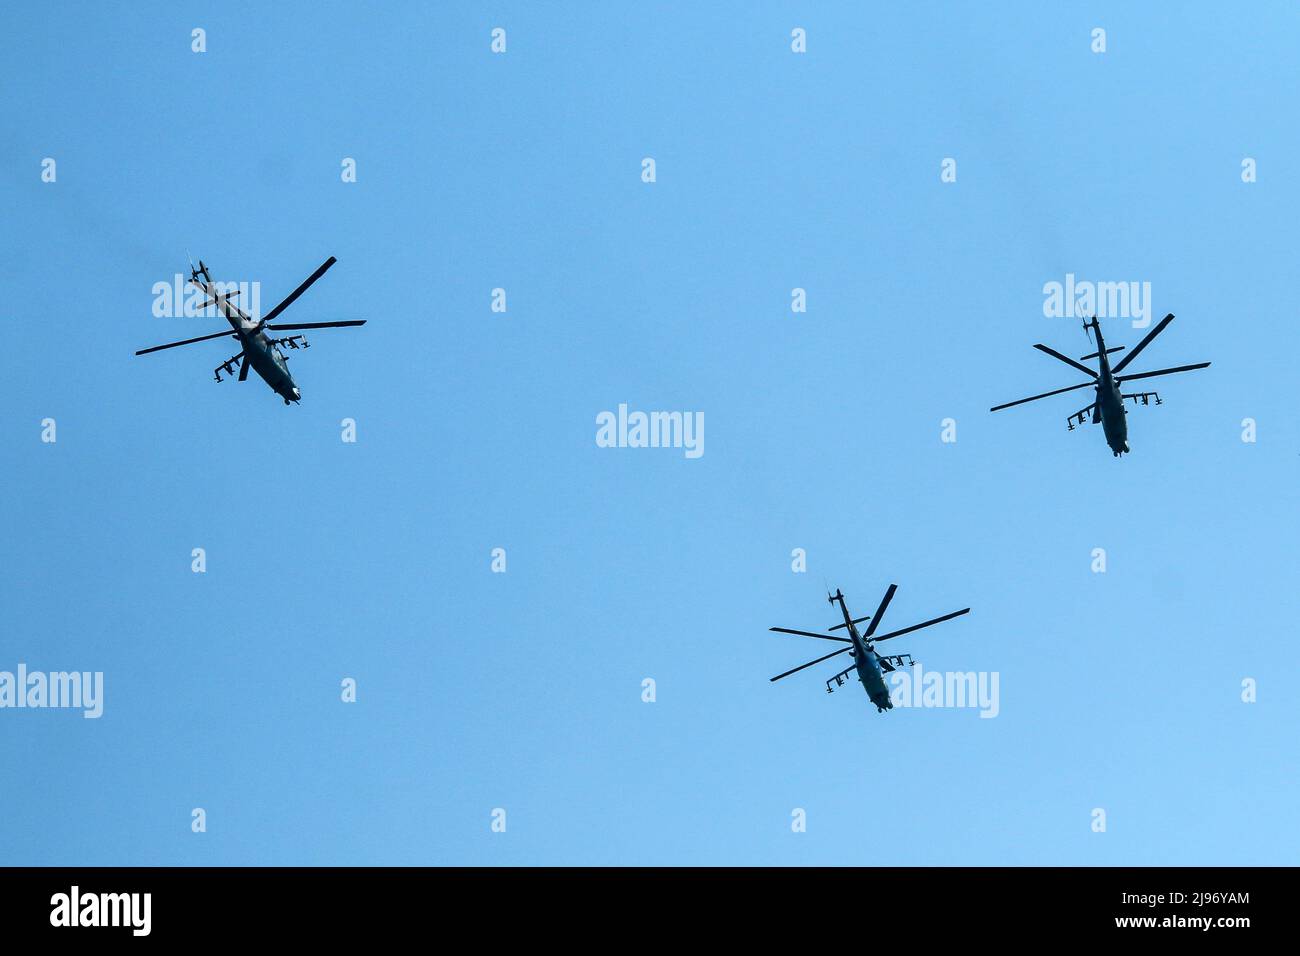 The flight of three soviet battle helicopters, type MIL Mi-24 flying on the bright blue sky. Stock Photo